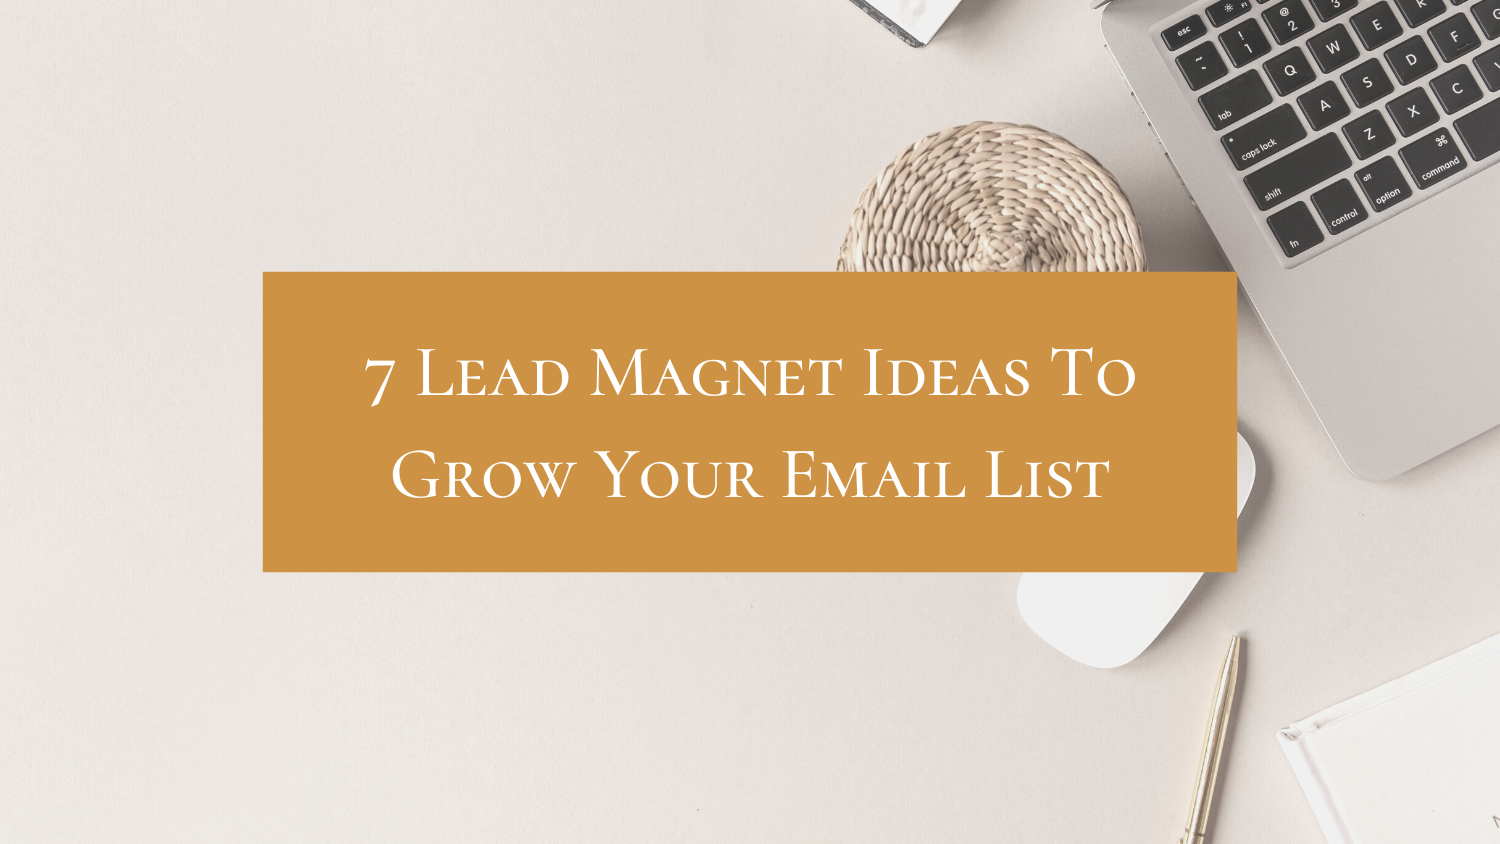 7 Lead Magnet Ideas To Grow Your Email List